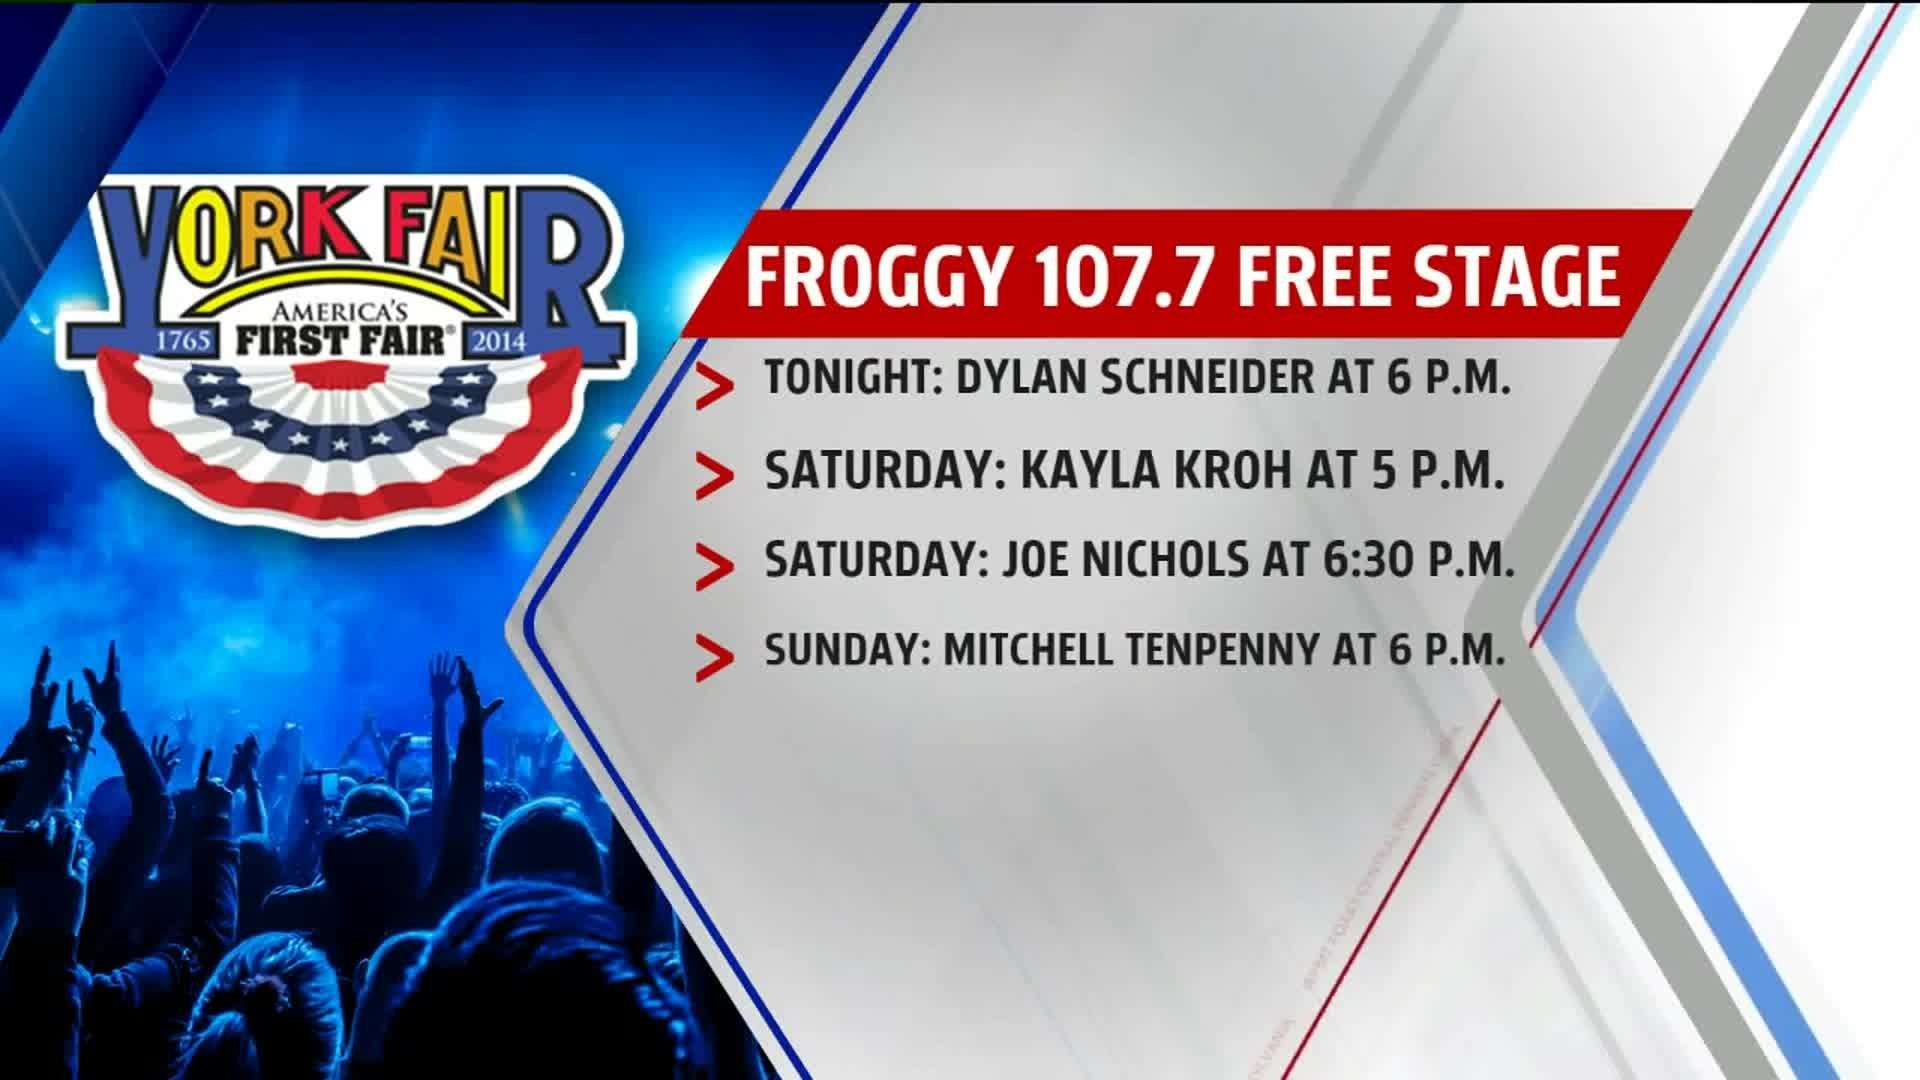 Froggy Free Stage serves as settings for young artists